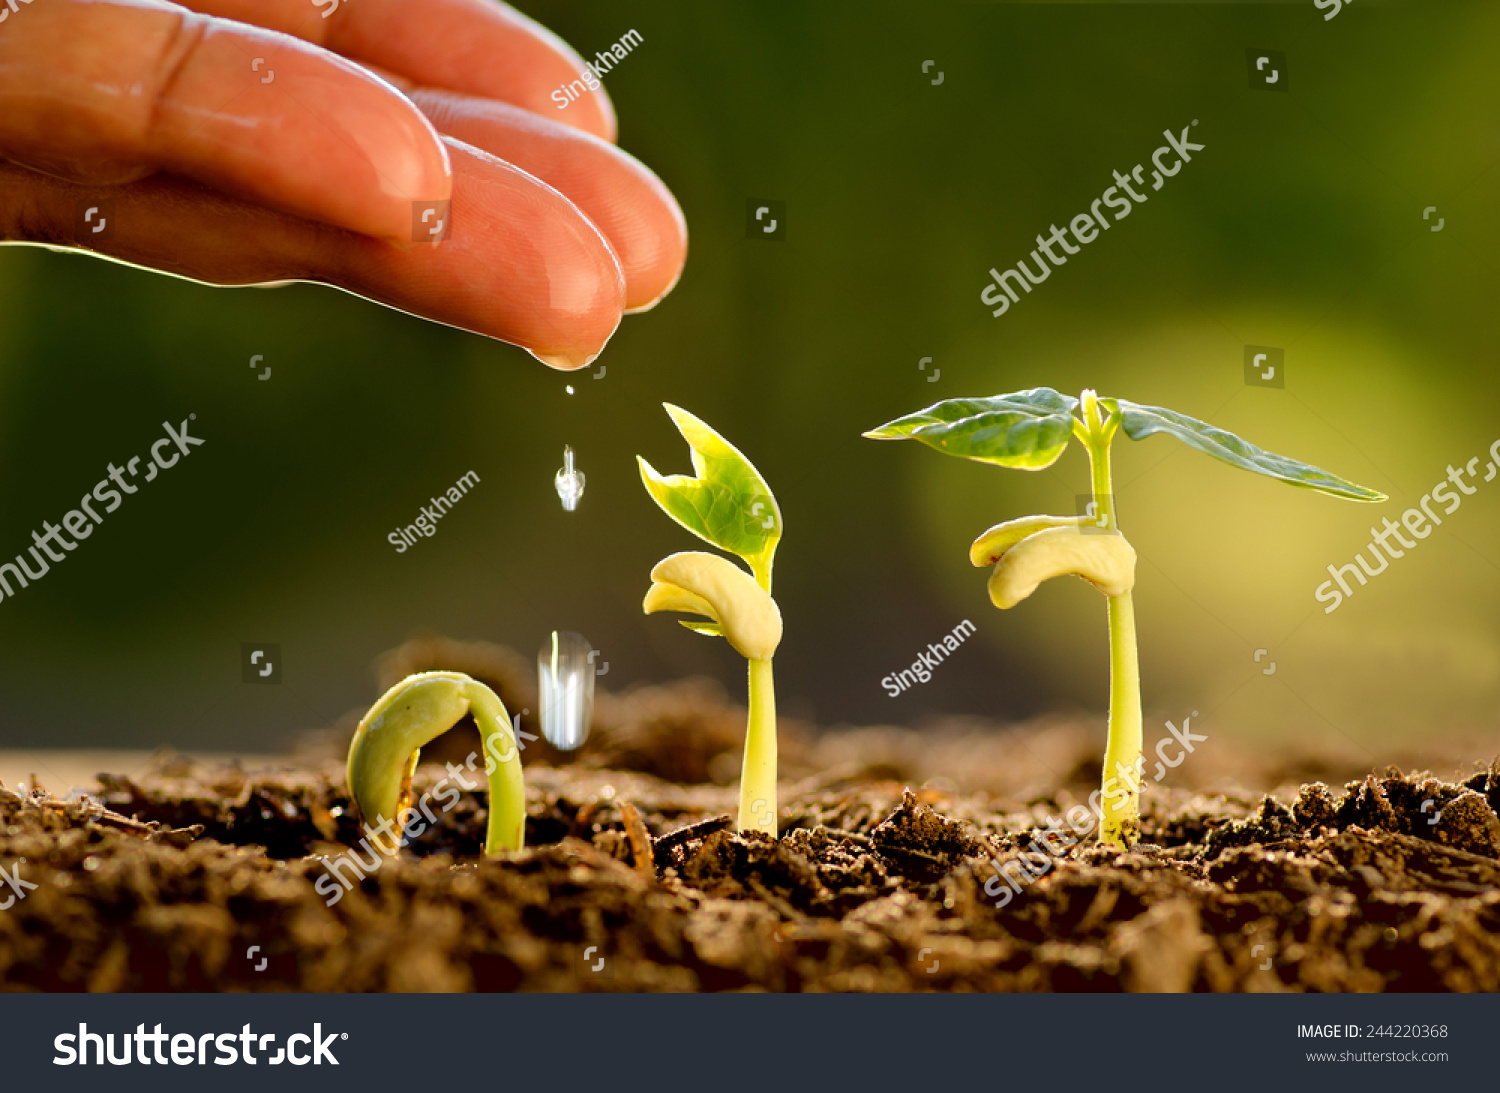 Agriculture and Seedling concept by Male hand watering young tree over green background #244220368